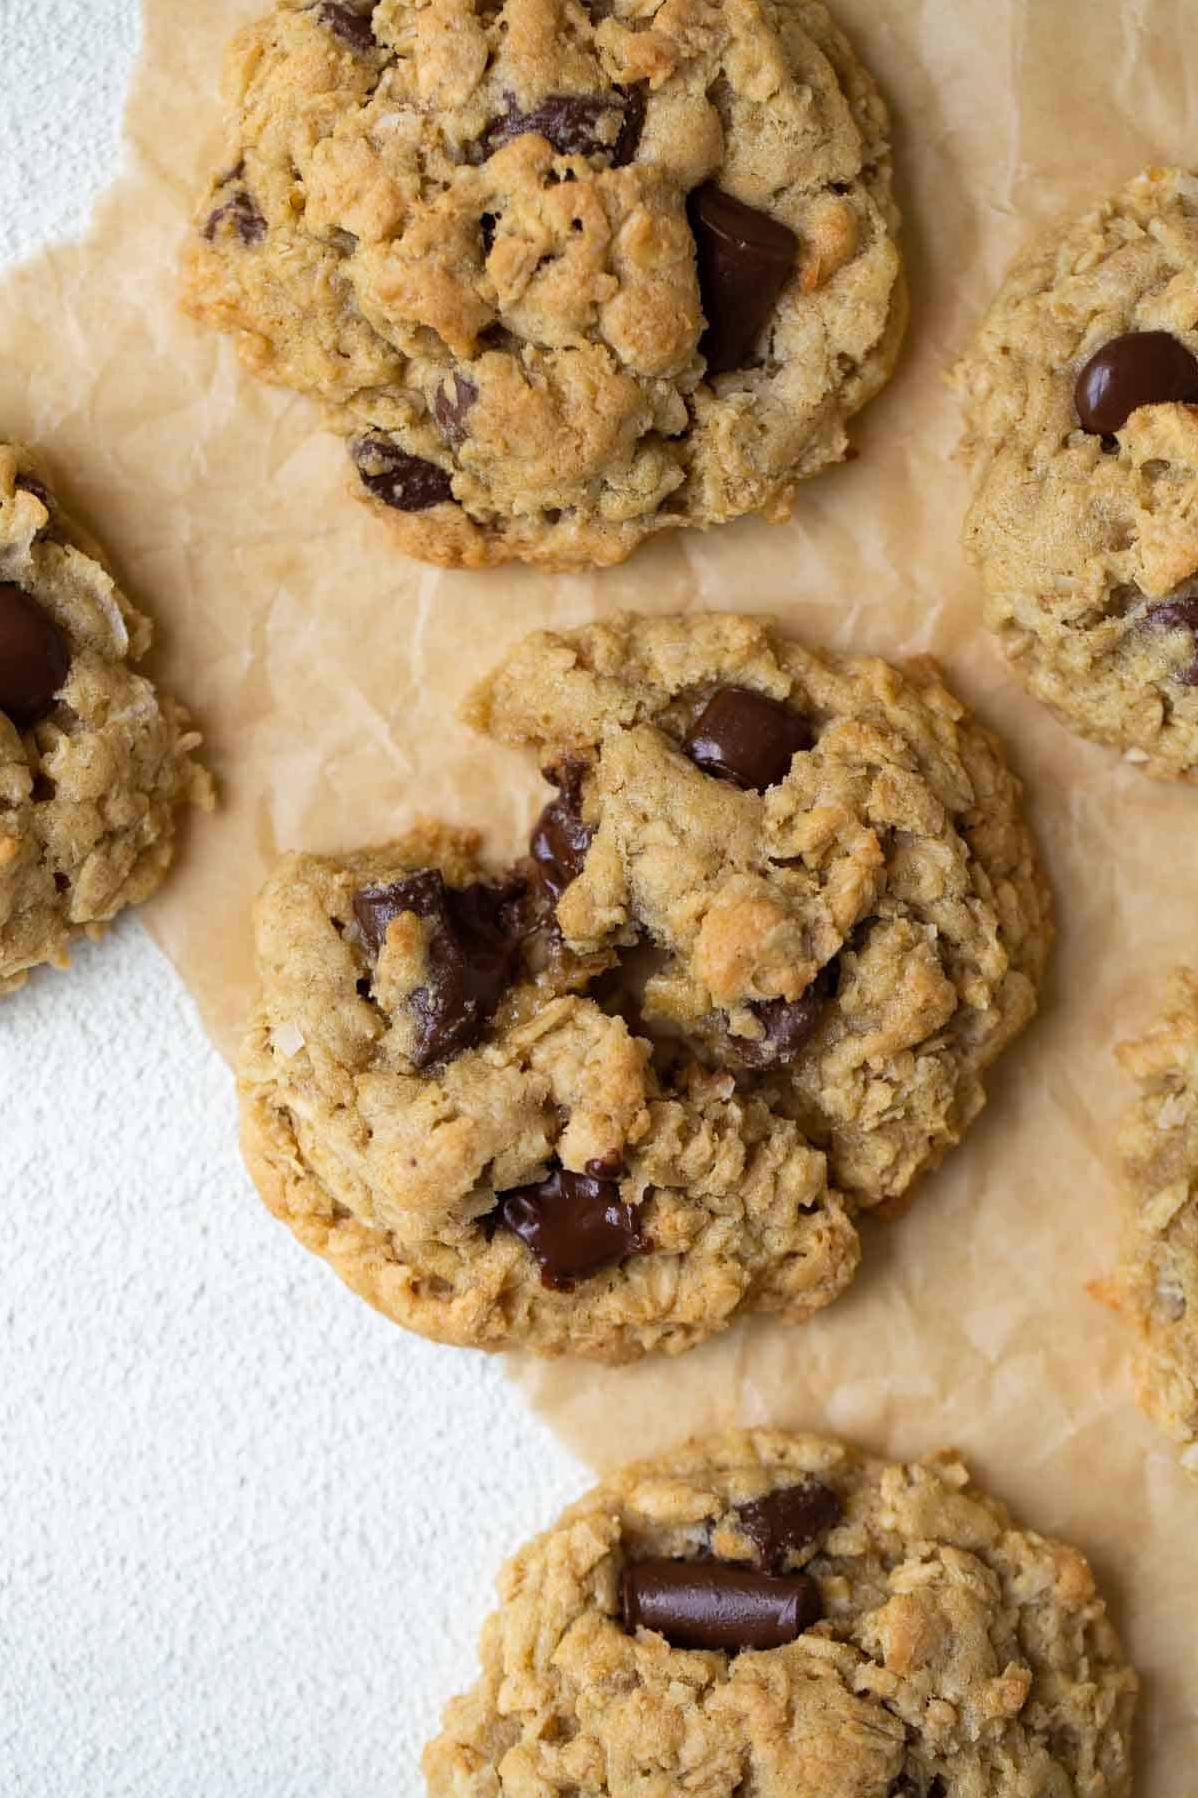  These cookies are loaded with chewy rolled oats and melted chocolate chips that will tantalize your taste buds.